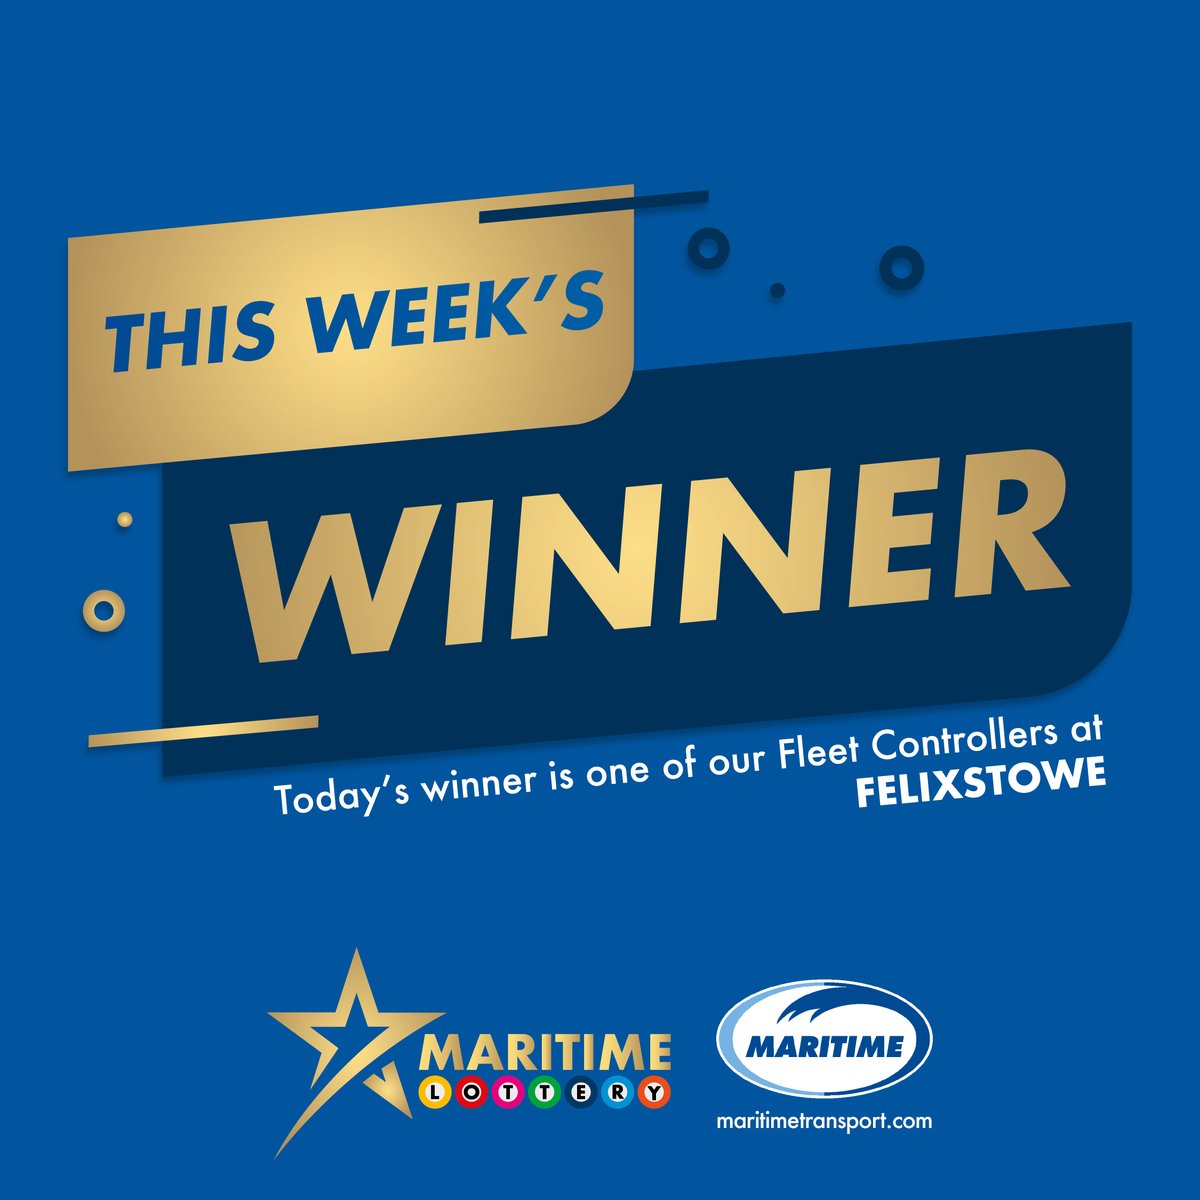 Congratulations to one of our Fleet Controllers, based at our Head Office in Felixstowe, who has just been announced as this week’s winner of our Maritime Lottery, taking home £1,000! Employees head to iWave to find out more. #mtllottery #maritimetransport